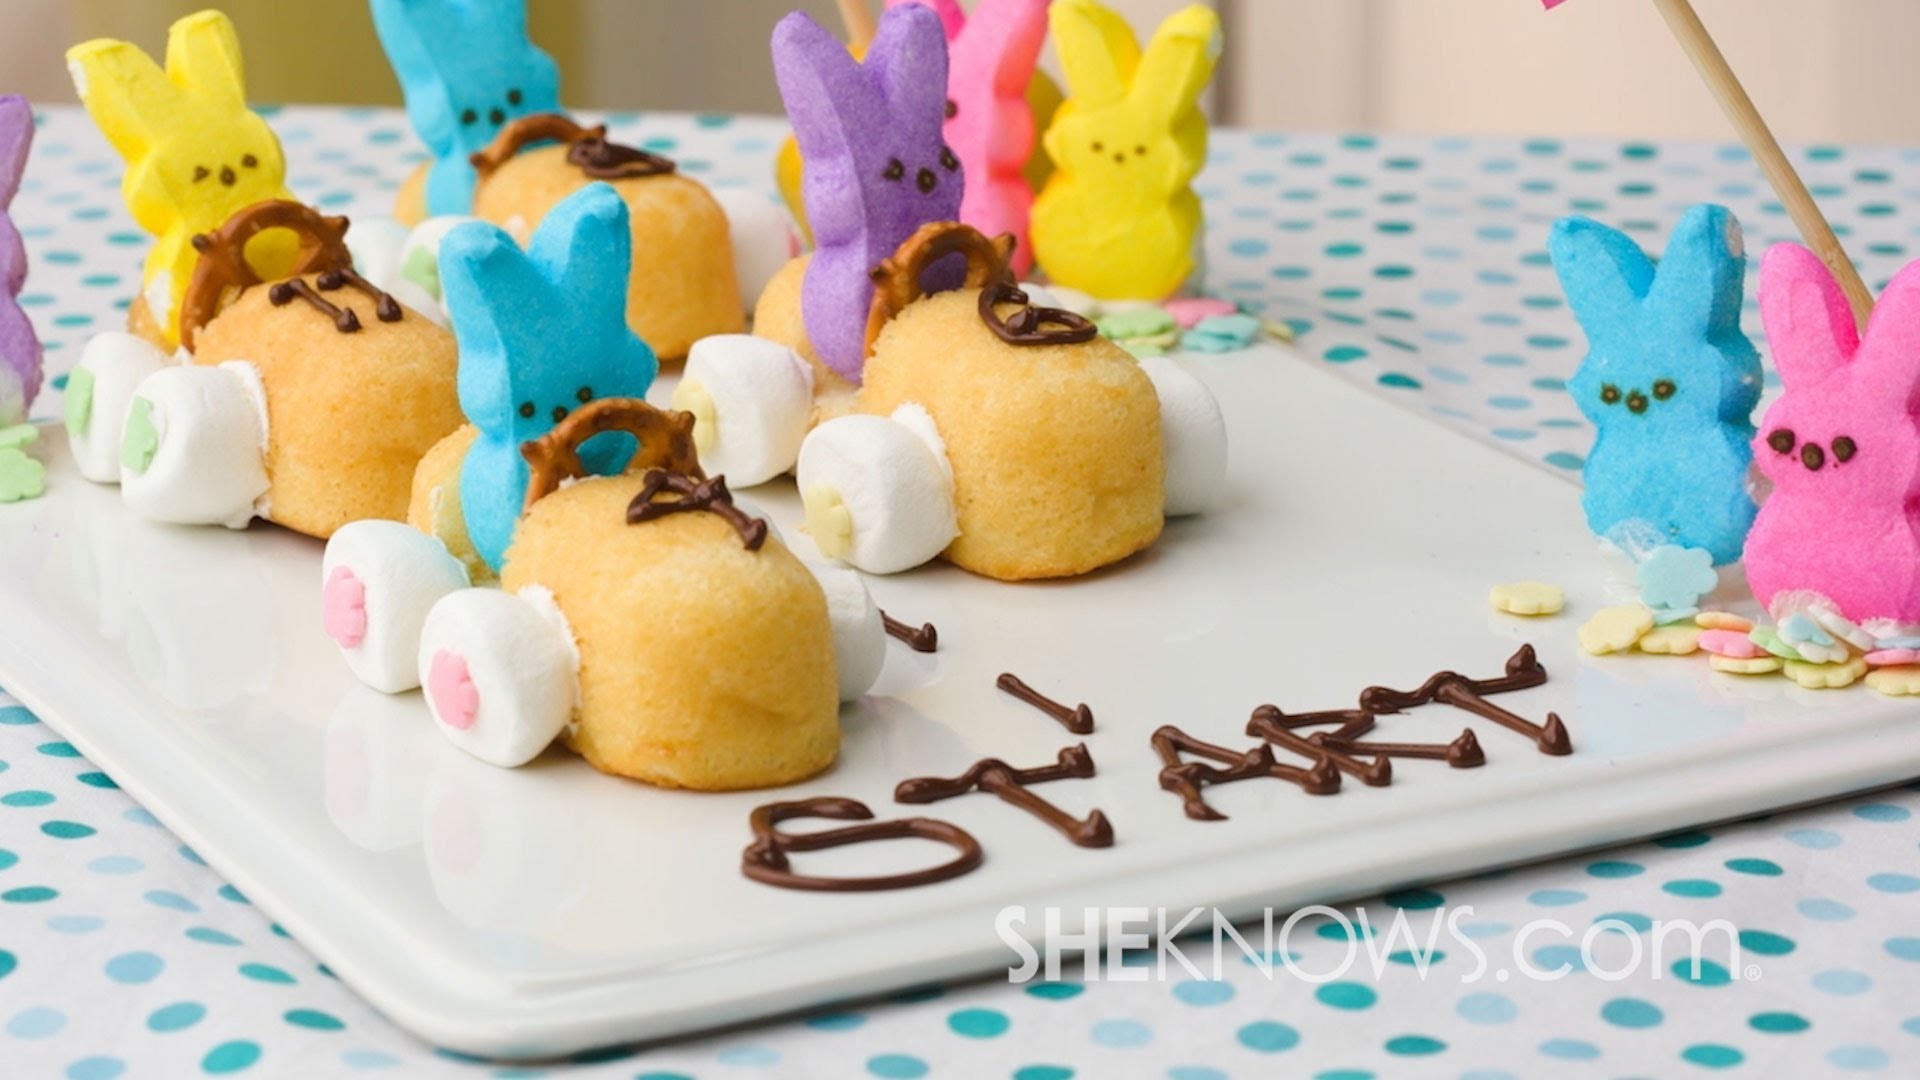 1920x1080 Bunny bagels, Peeps S'mores, and other easy Easter treats to make with your  kids.